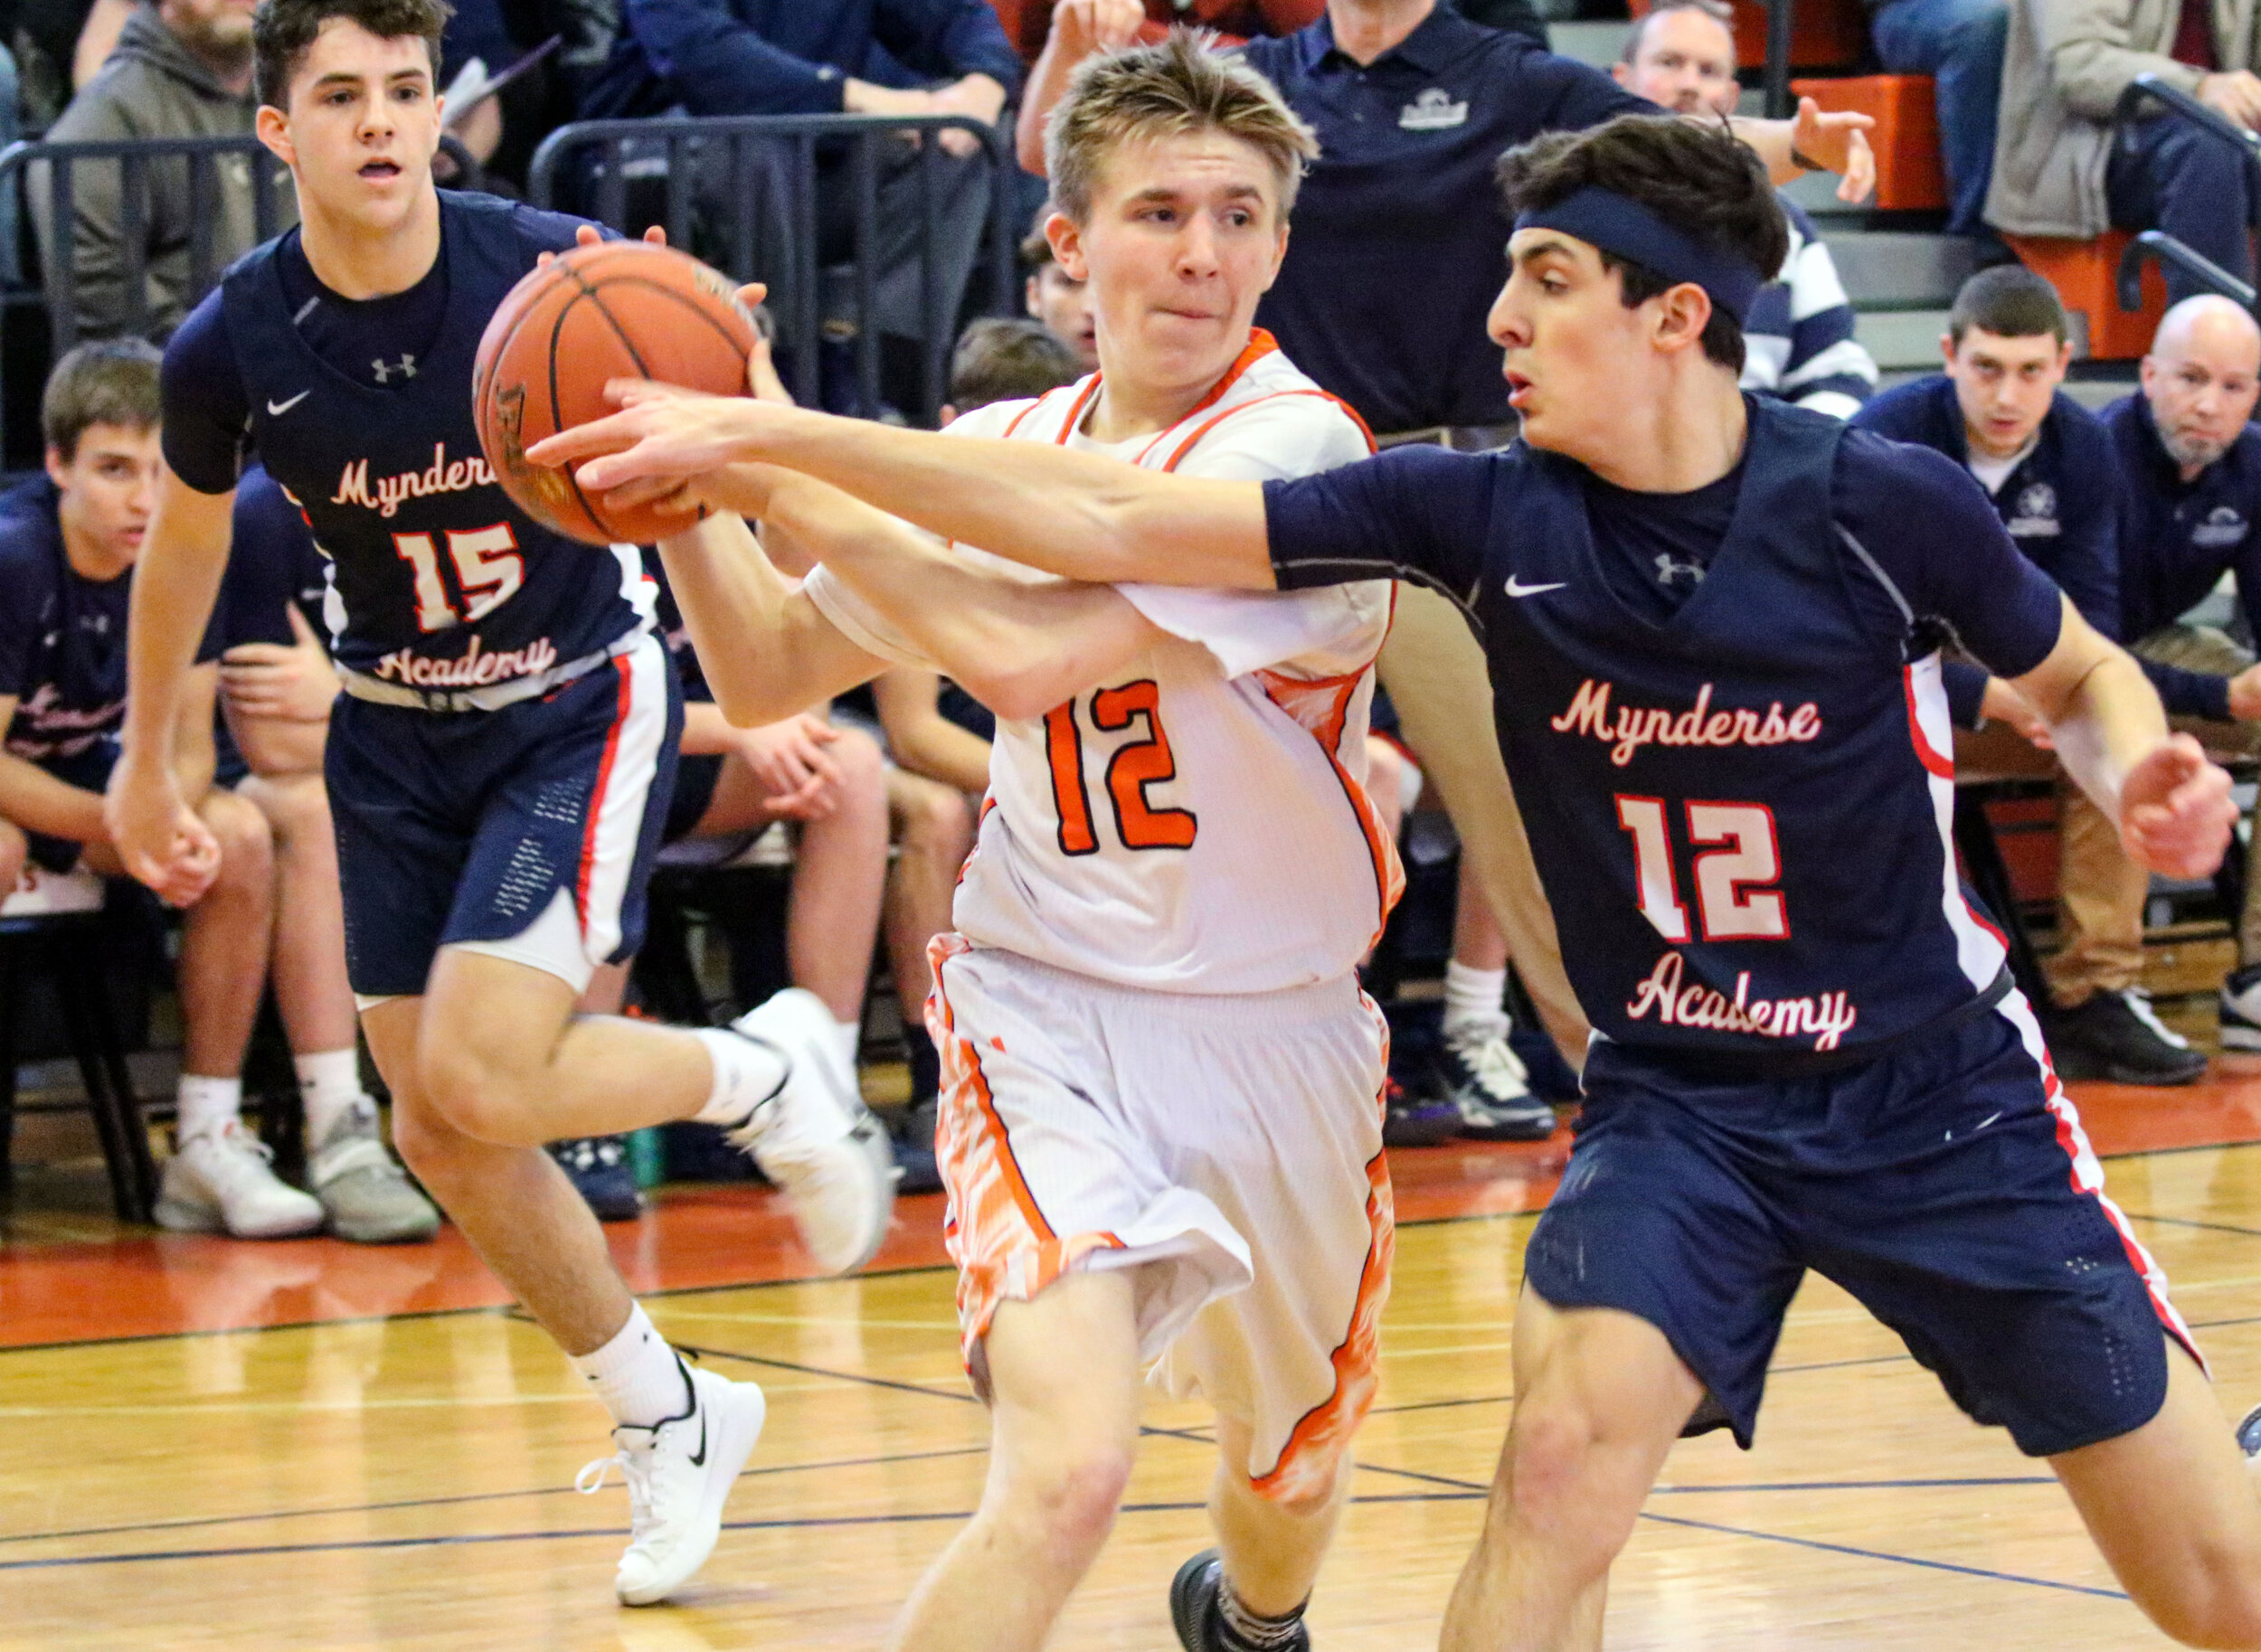  Wellsville junior Liam McKinley, center, looks to make a pass to the inside against the Mynderse defense on his drive during Saturday afternoon’s Class B2 Quarterfinal matchup in Wellsville. [Chris Brooks/WellsvilleSports.com] 